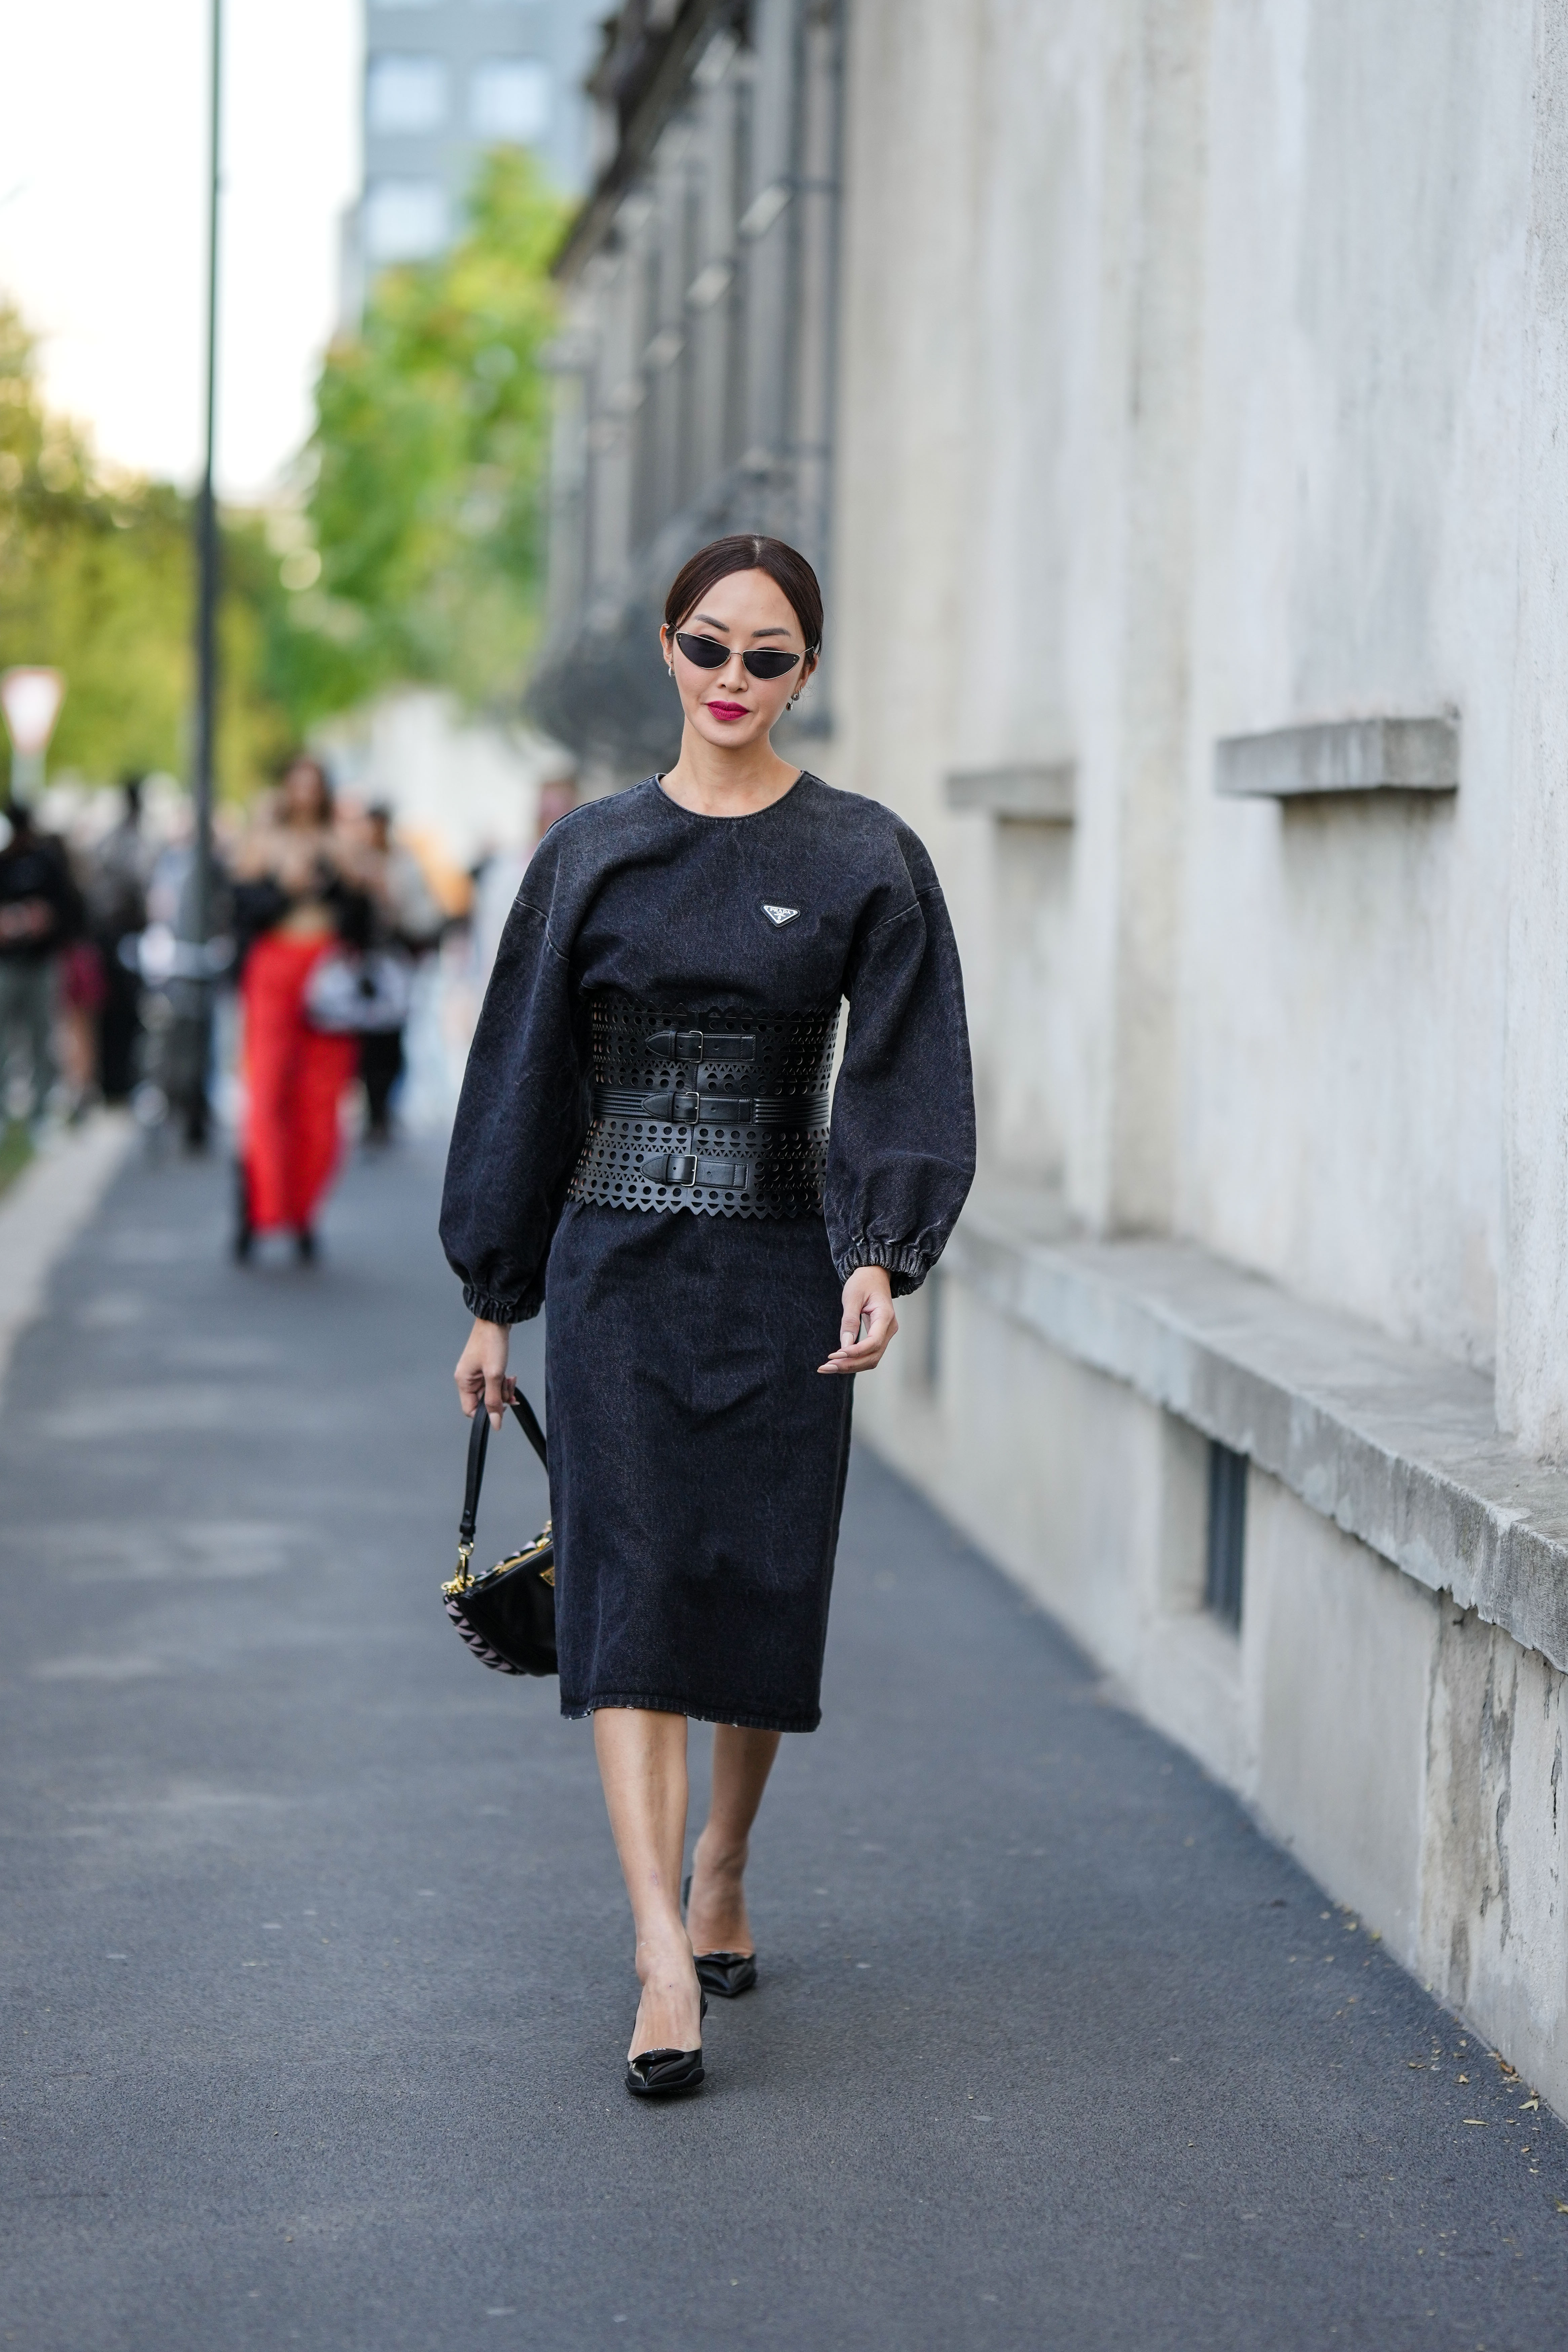 Chriselle Lim wearing a black corset on a black denim long sleeves dress during the Milan Fashion Week on September 22, 2022, in Milan | Source: Getty Images